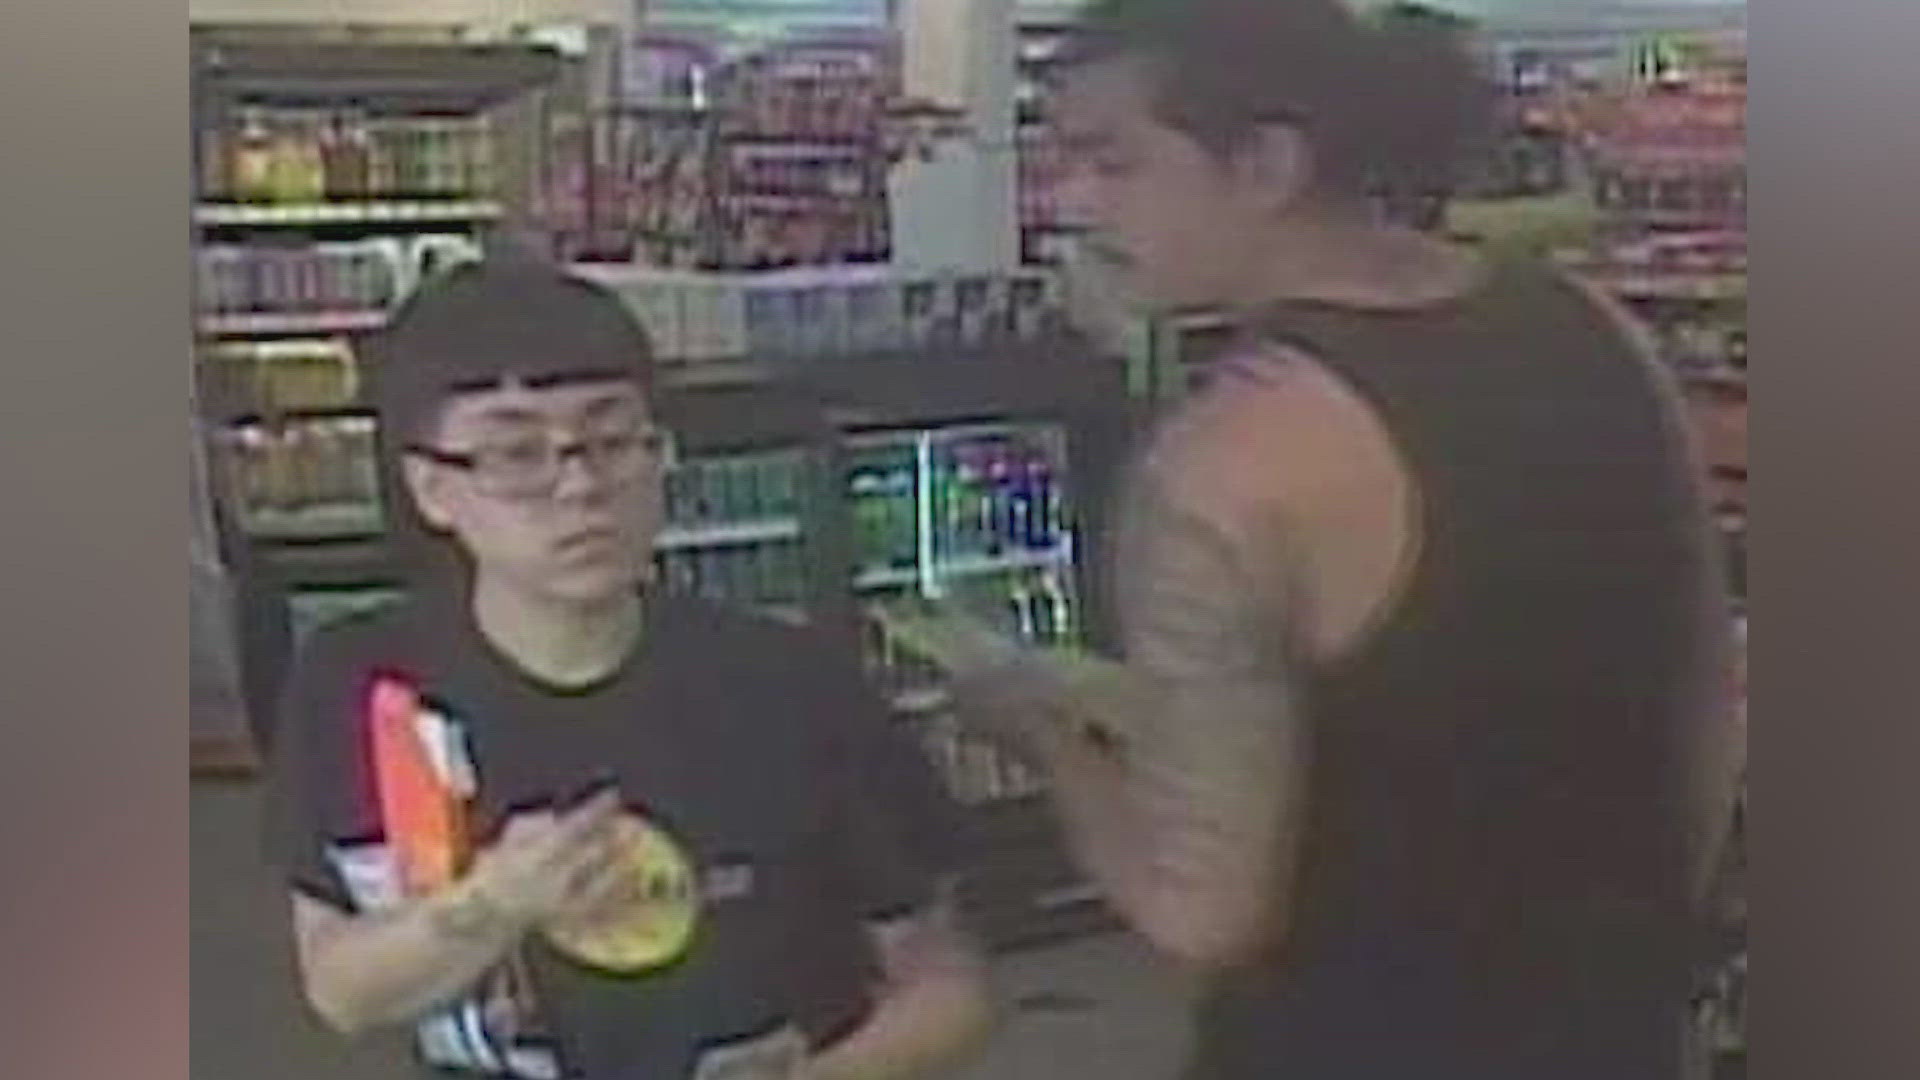 The pair of suspects are wanted for burglarizing a local store.